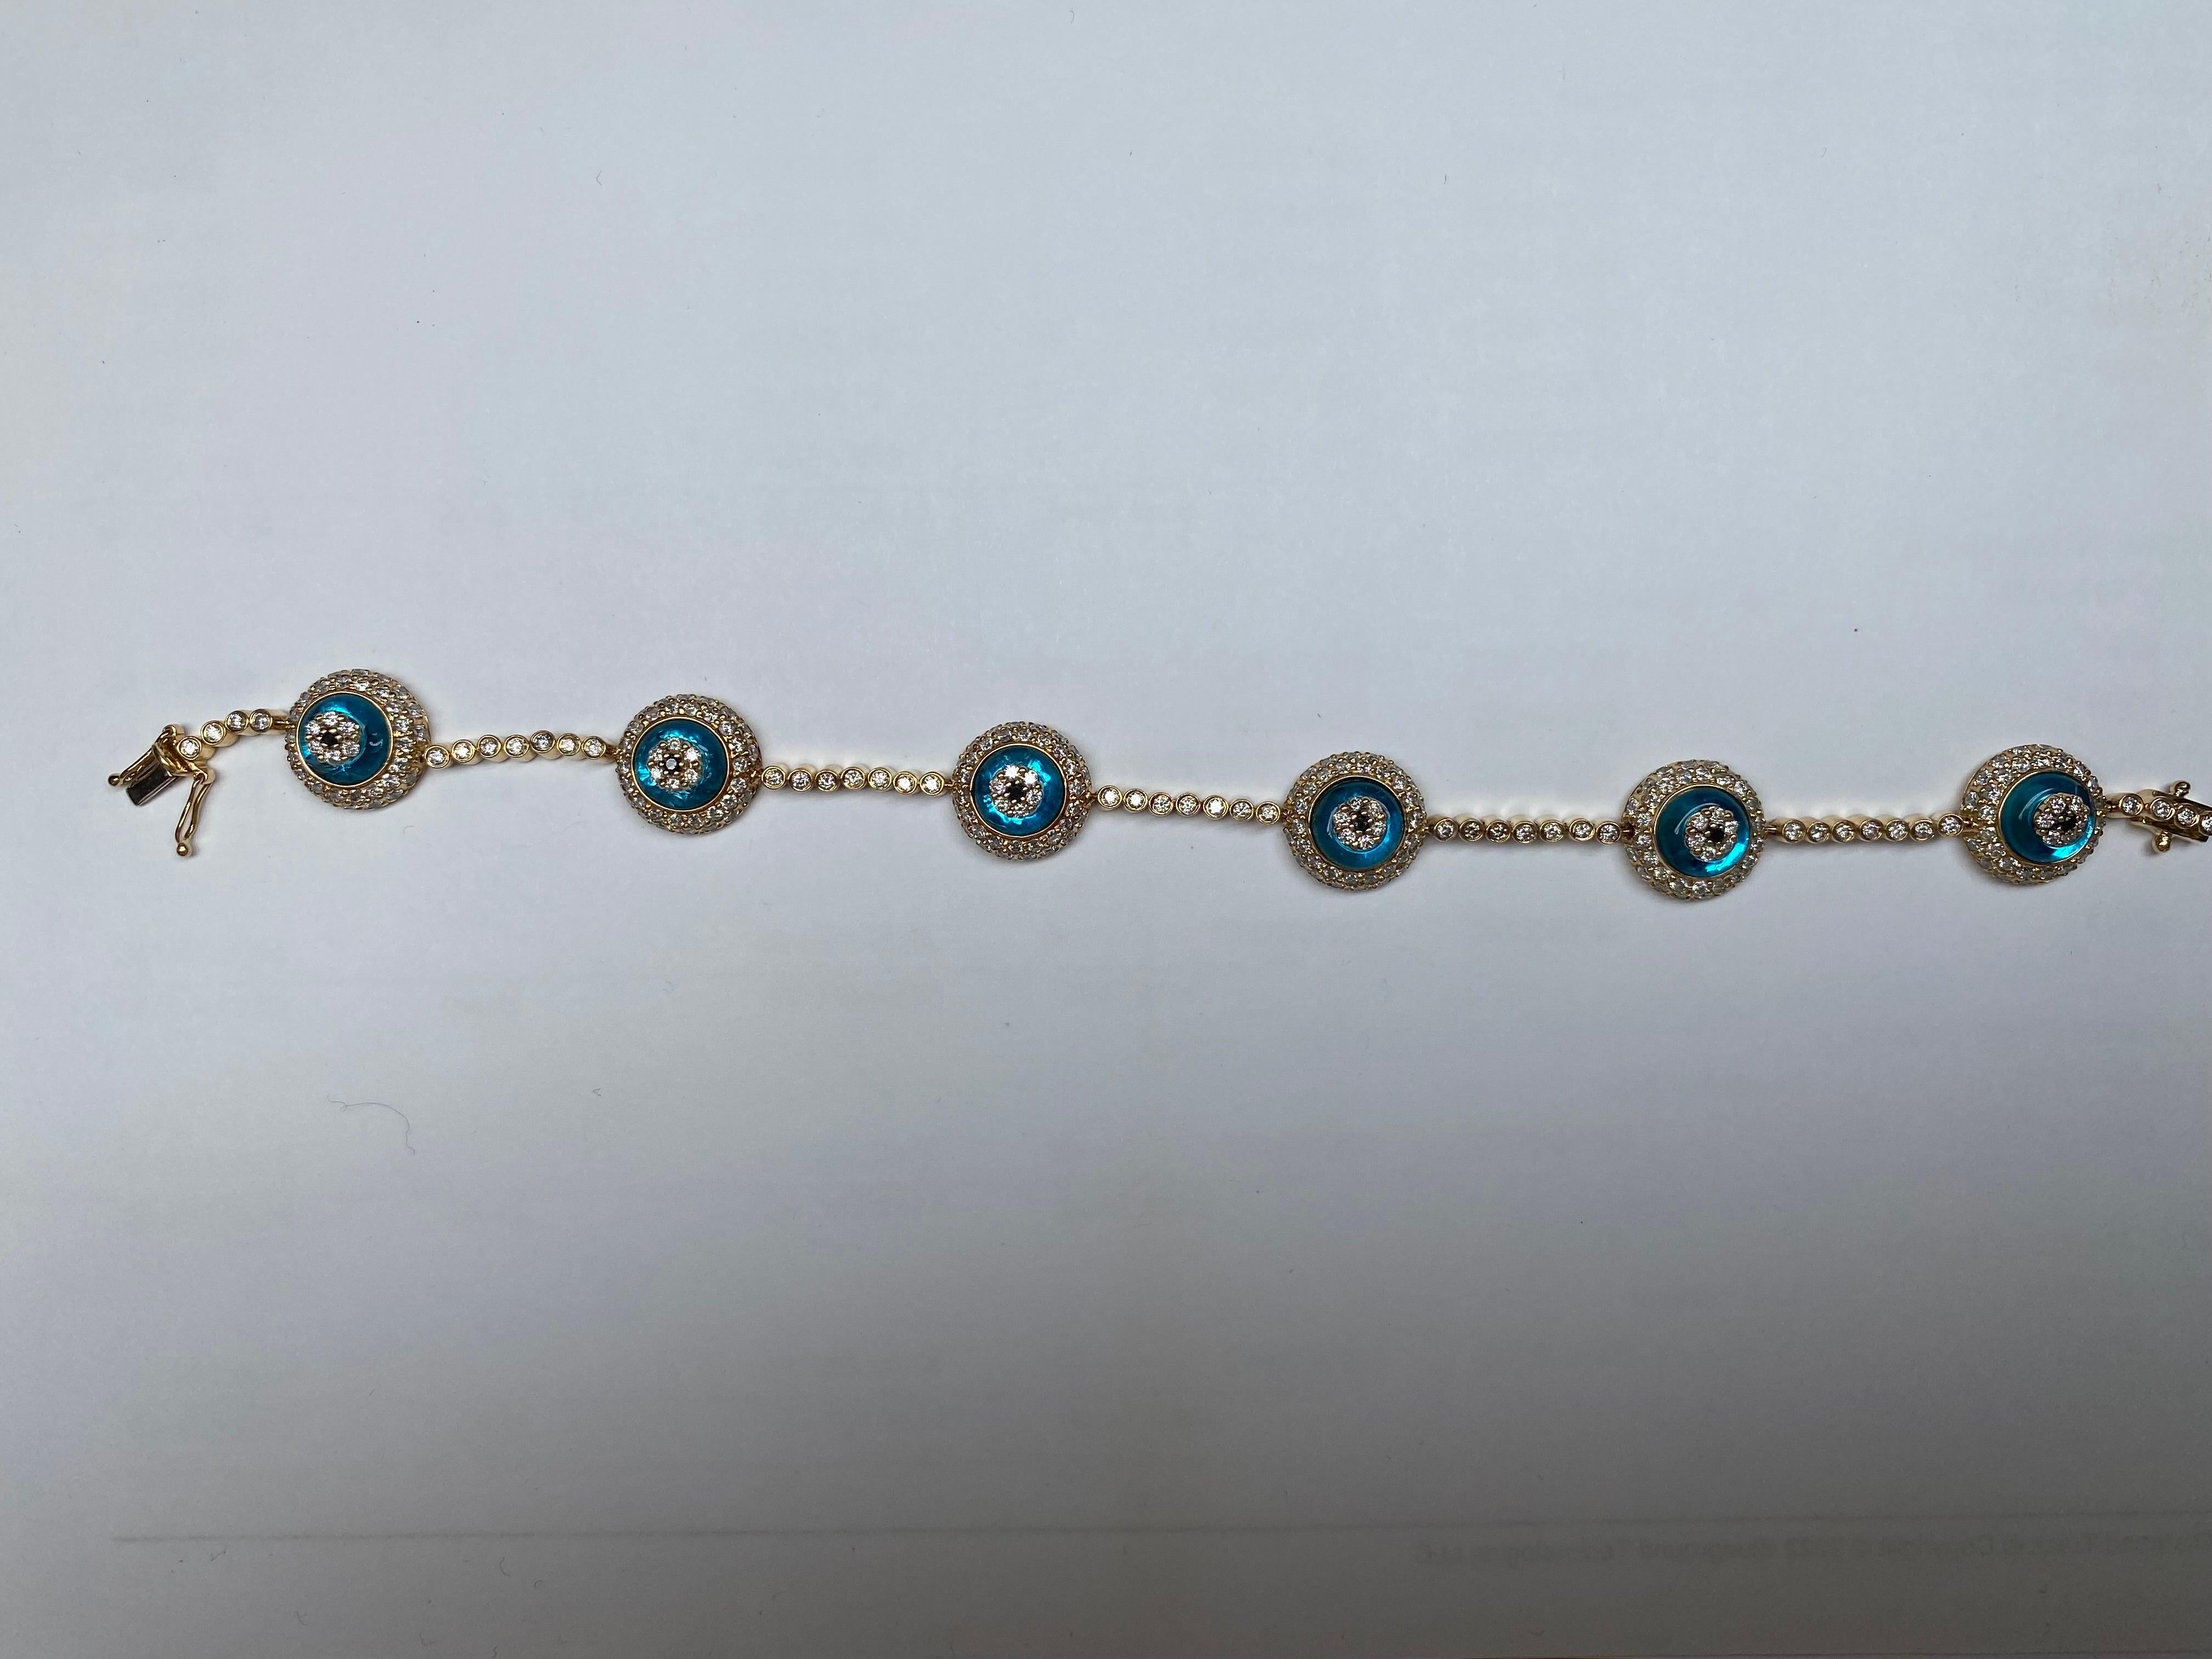 Handmade 18k Yellow Gold Evil Eye bracelet with 6 blue sapphires and round brilliant cut diamonds weighing a total of 4.28 carats. 21.85g

Viewings available in our NYC wholesale office by appointment only. 

Accredited appraisal from independent